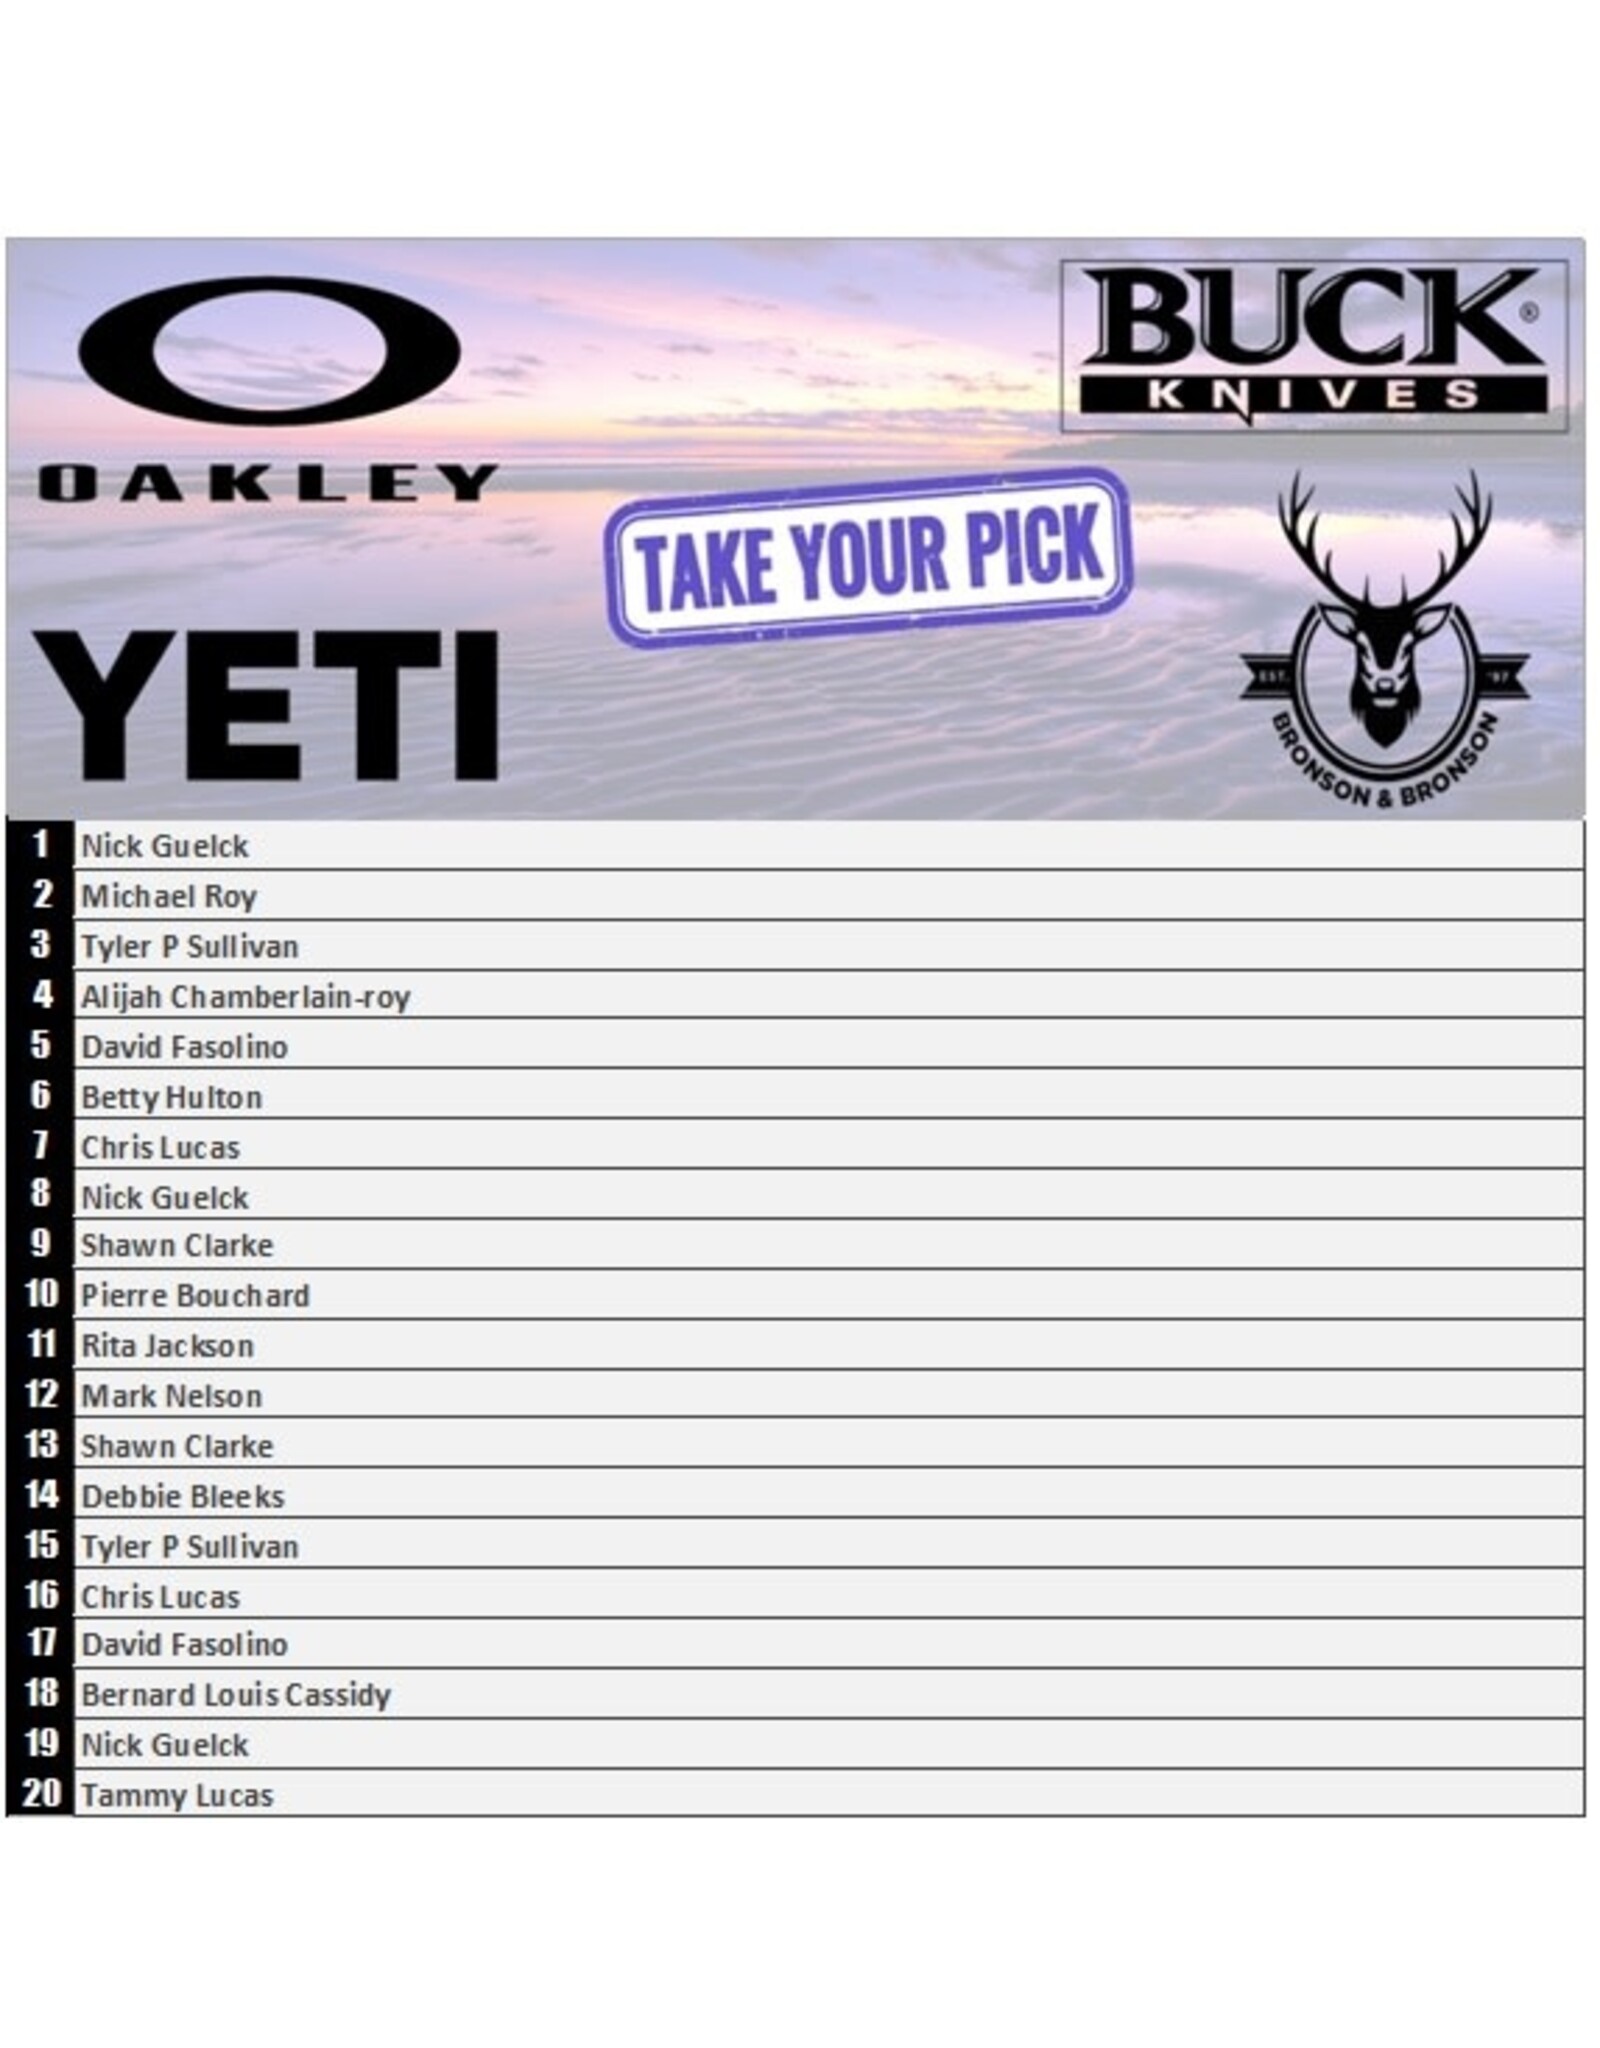 DRAW #1283 - Take Your Pick - Oakley, Yeti, Buck OR Gift Card